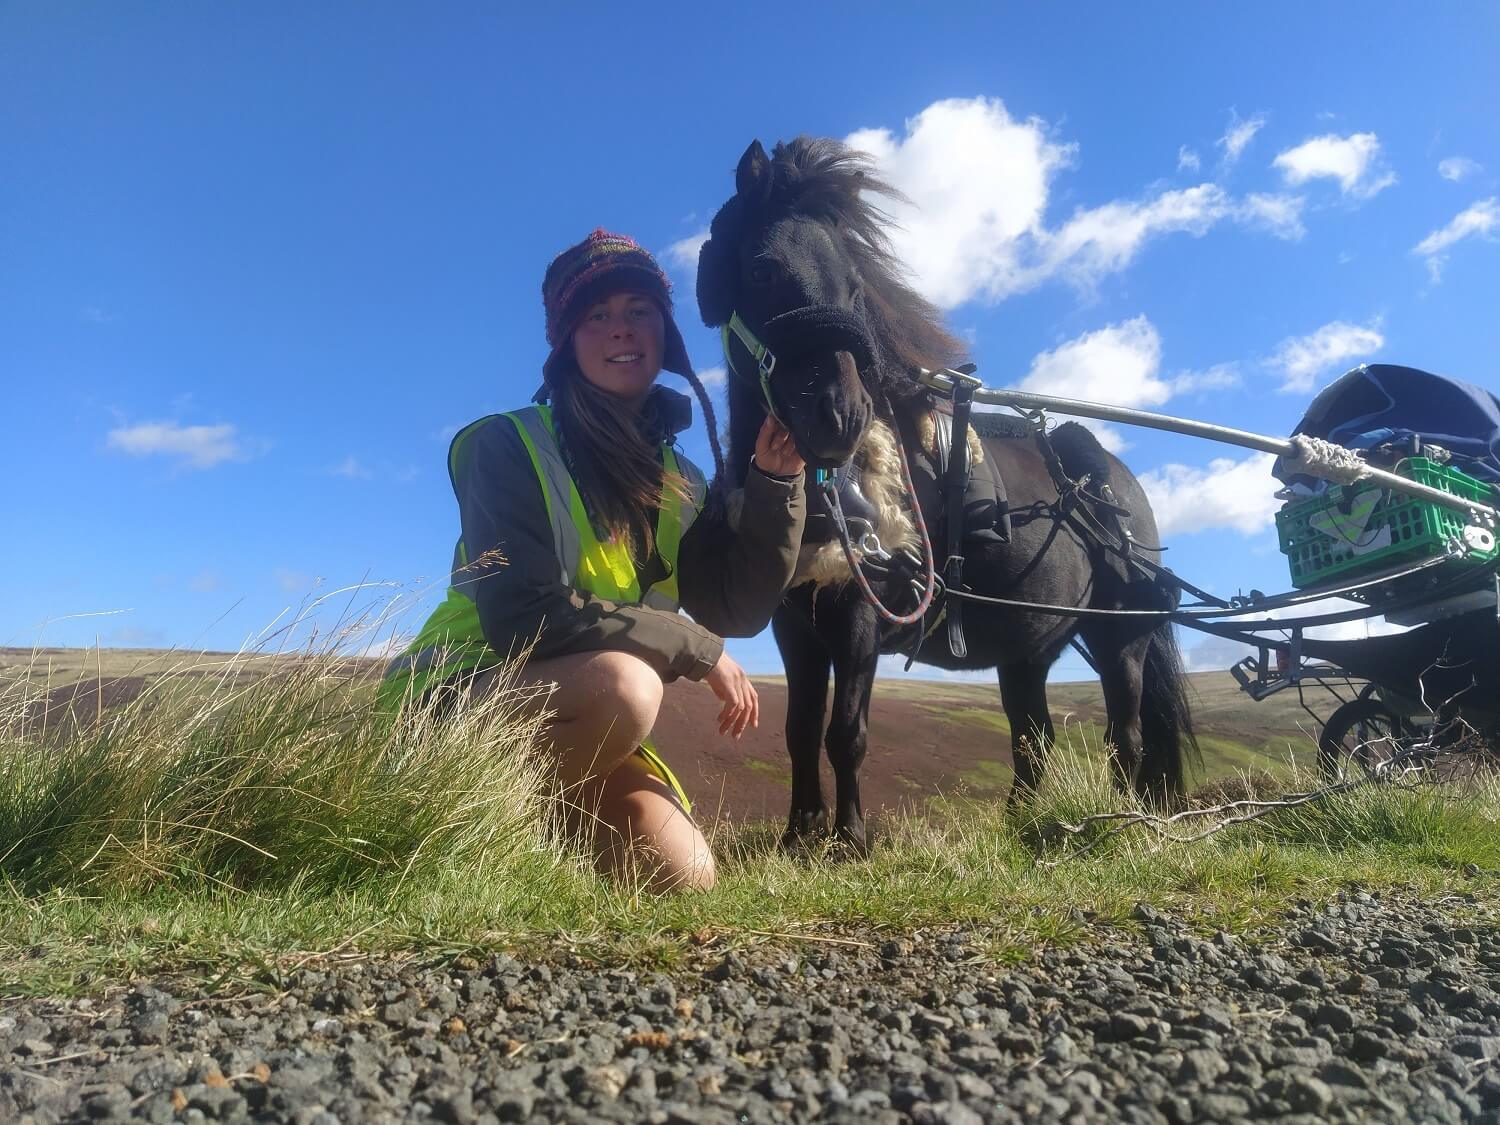 This international student walked from Spain to Scotland with her pony — here’s her story